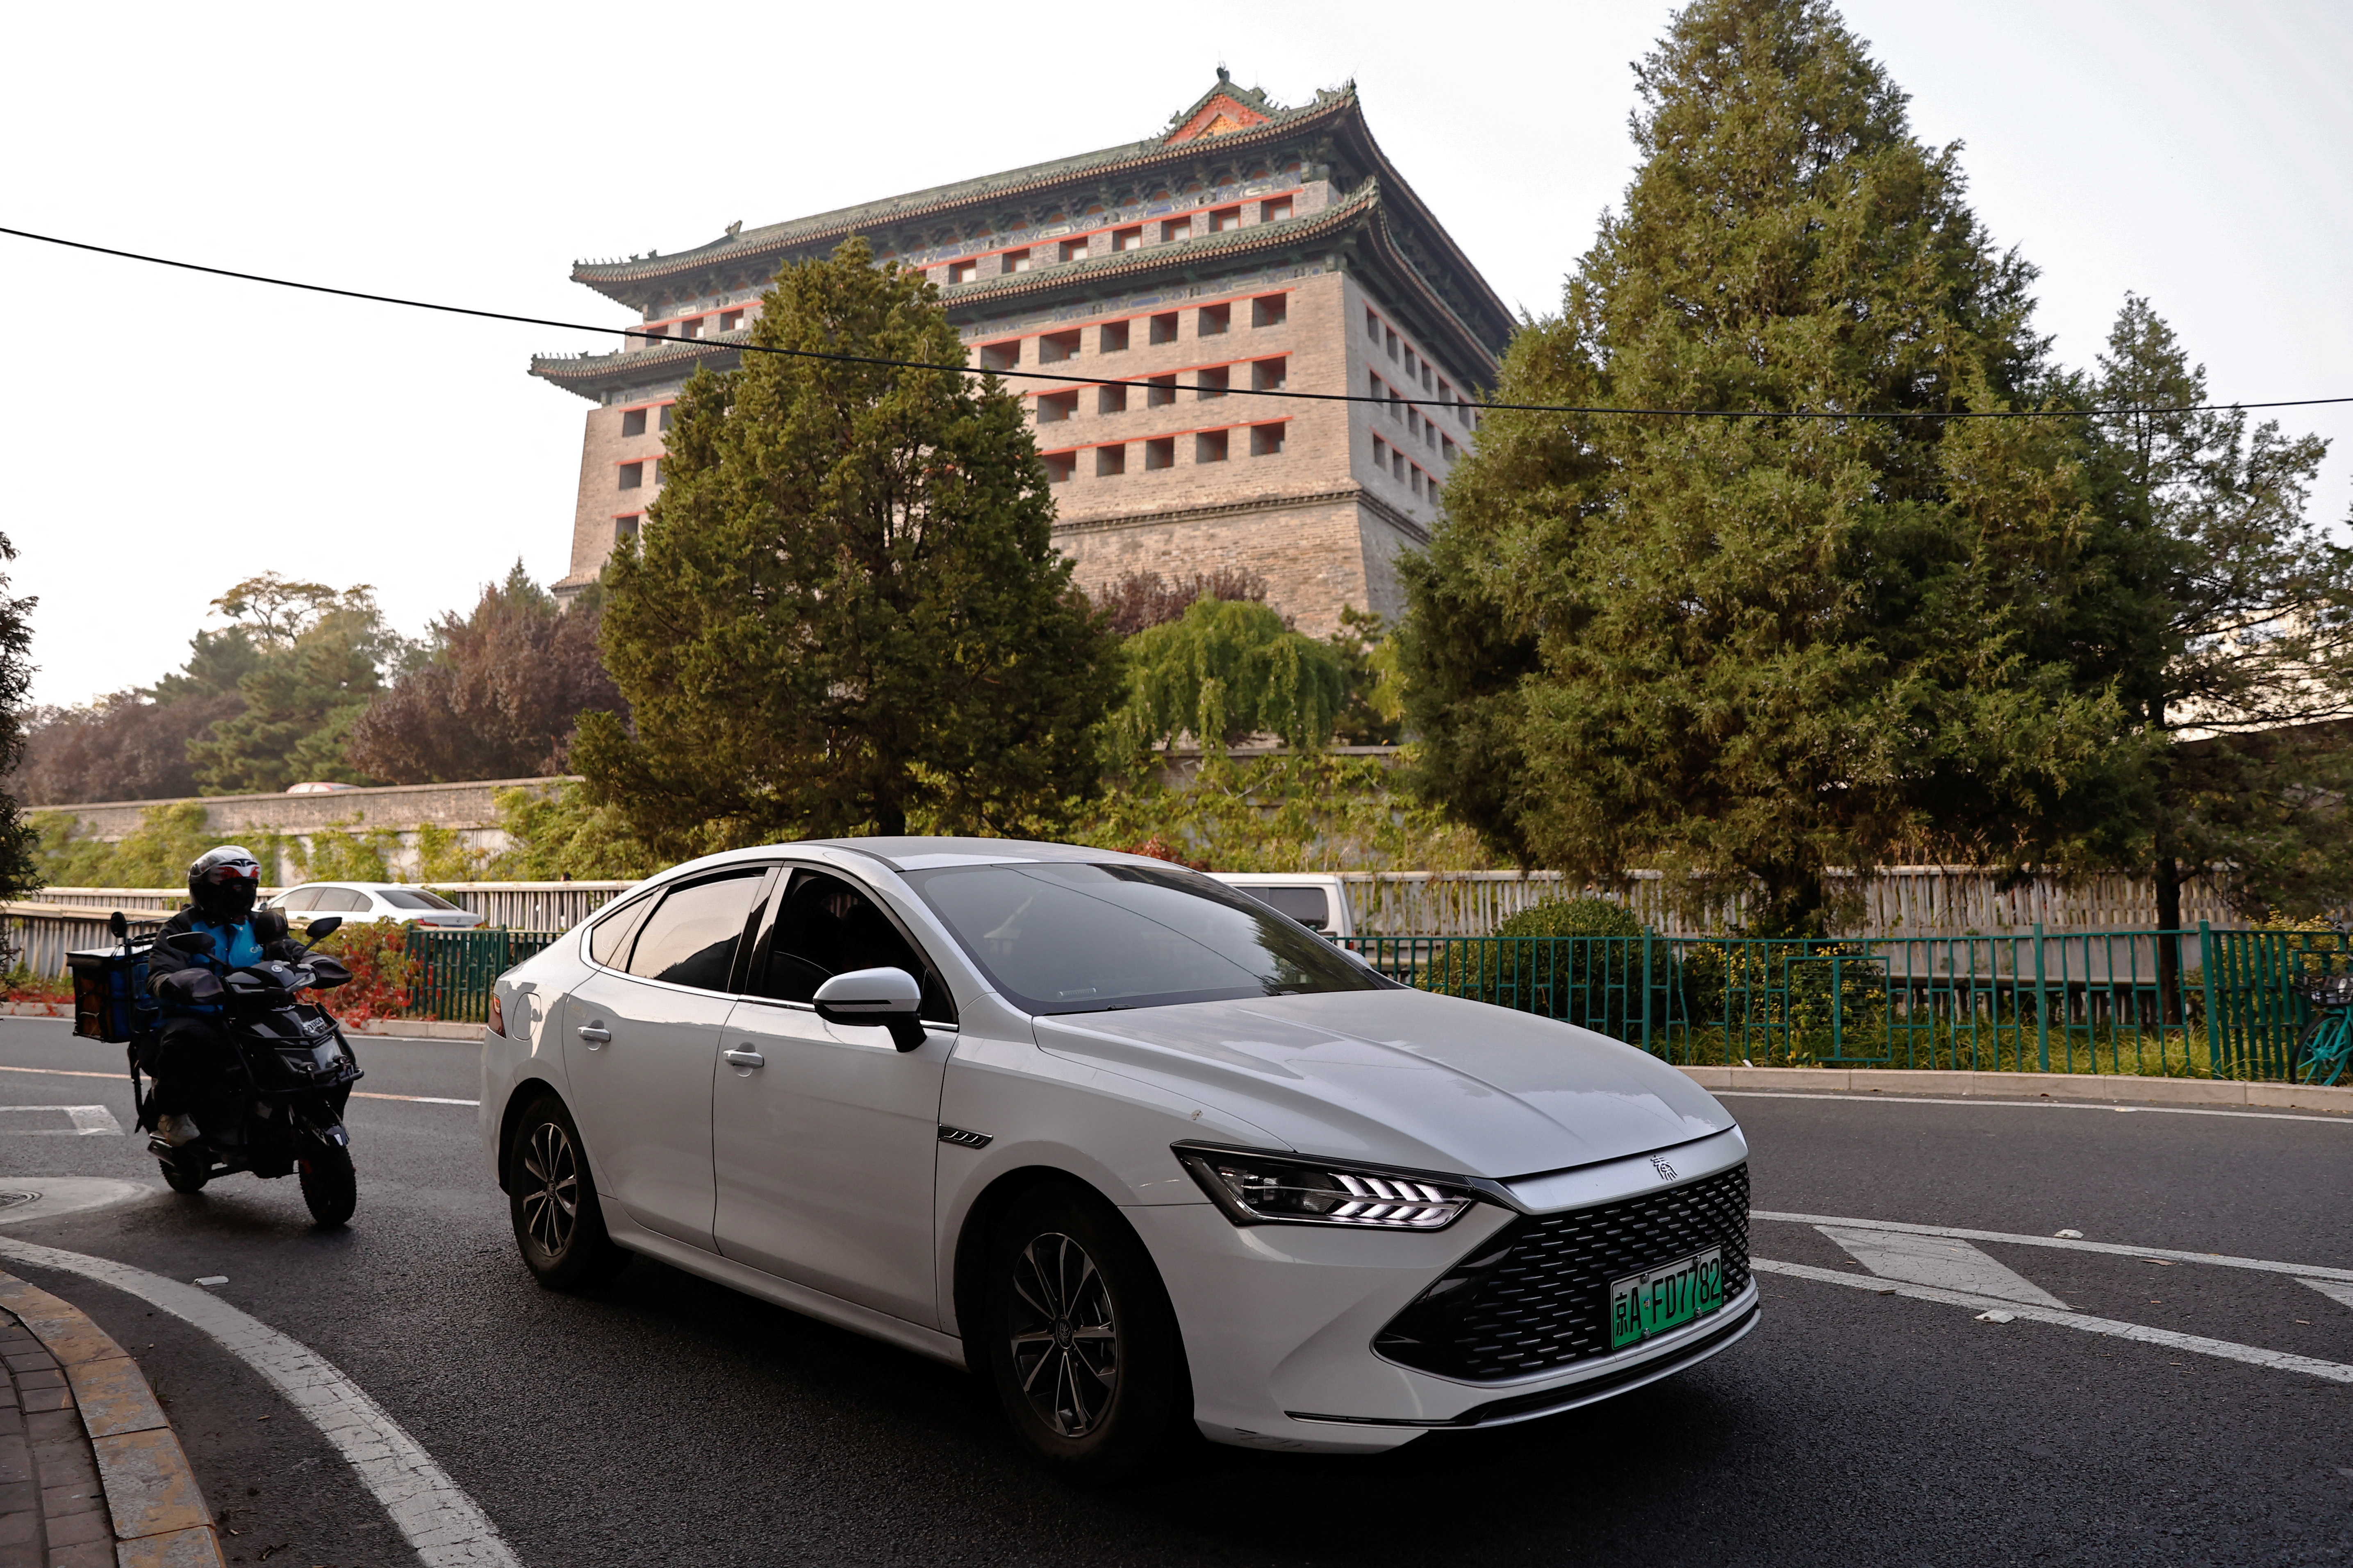 BYD's electric vehicle (EV) Qin moves on a street in Beijing